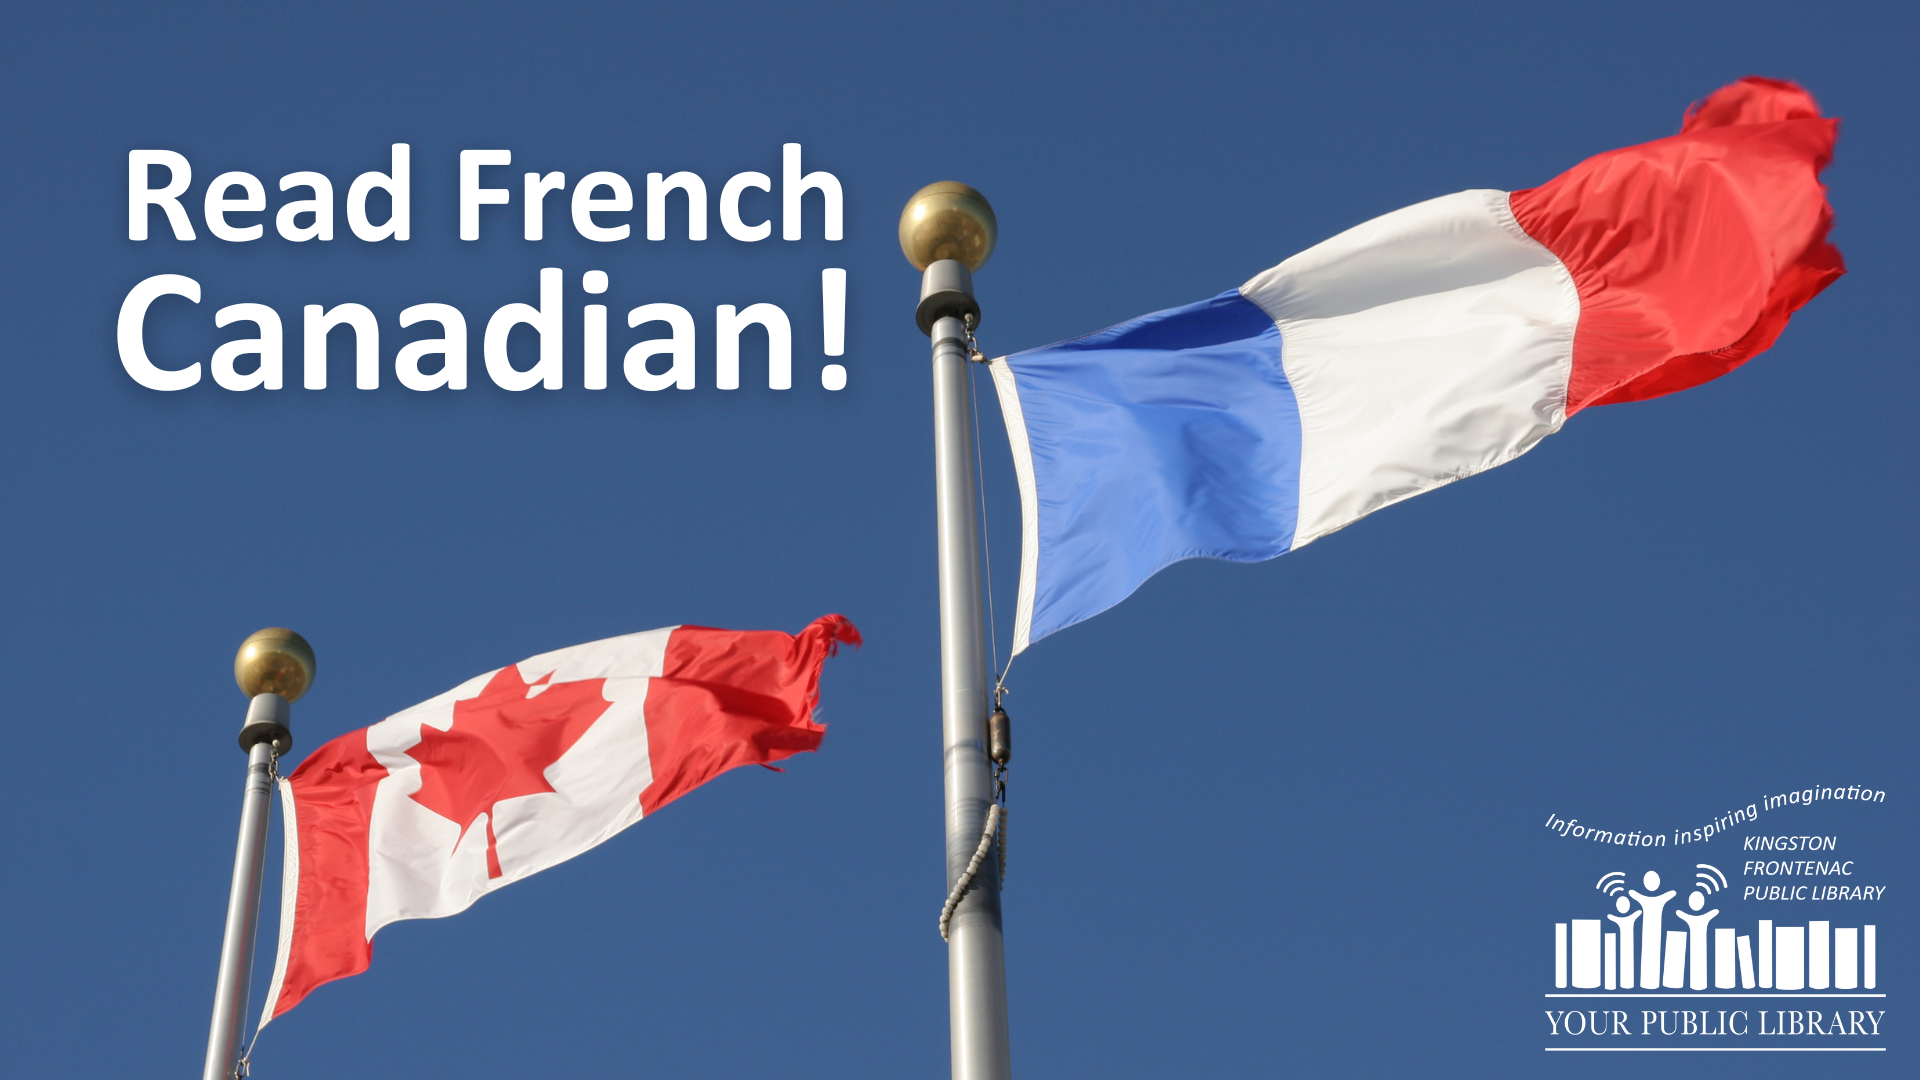 A Canadian and a French flag flying, with text reading 'Read French Canadian.'